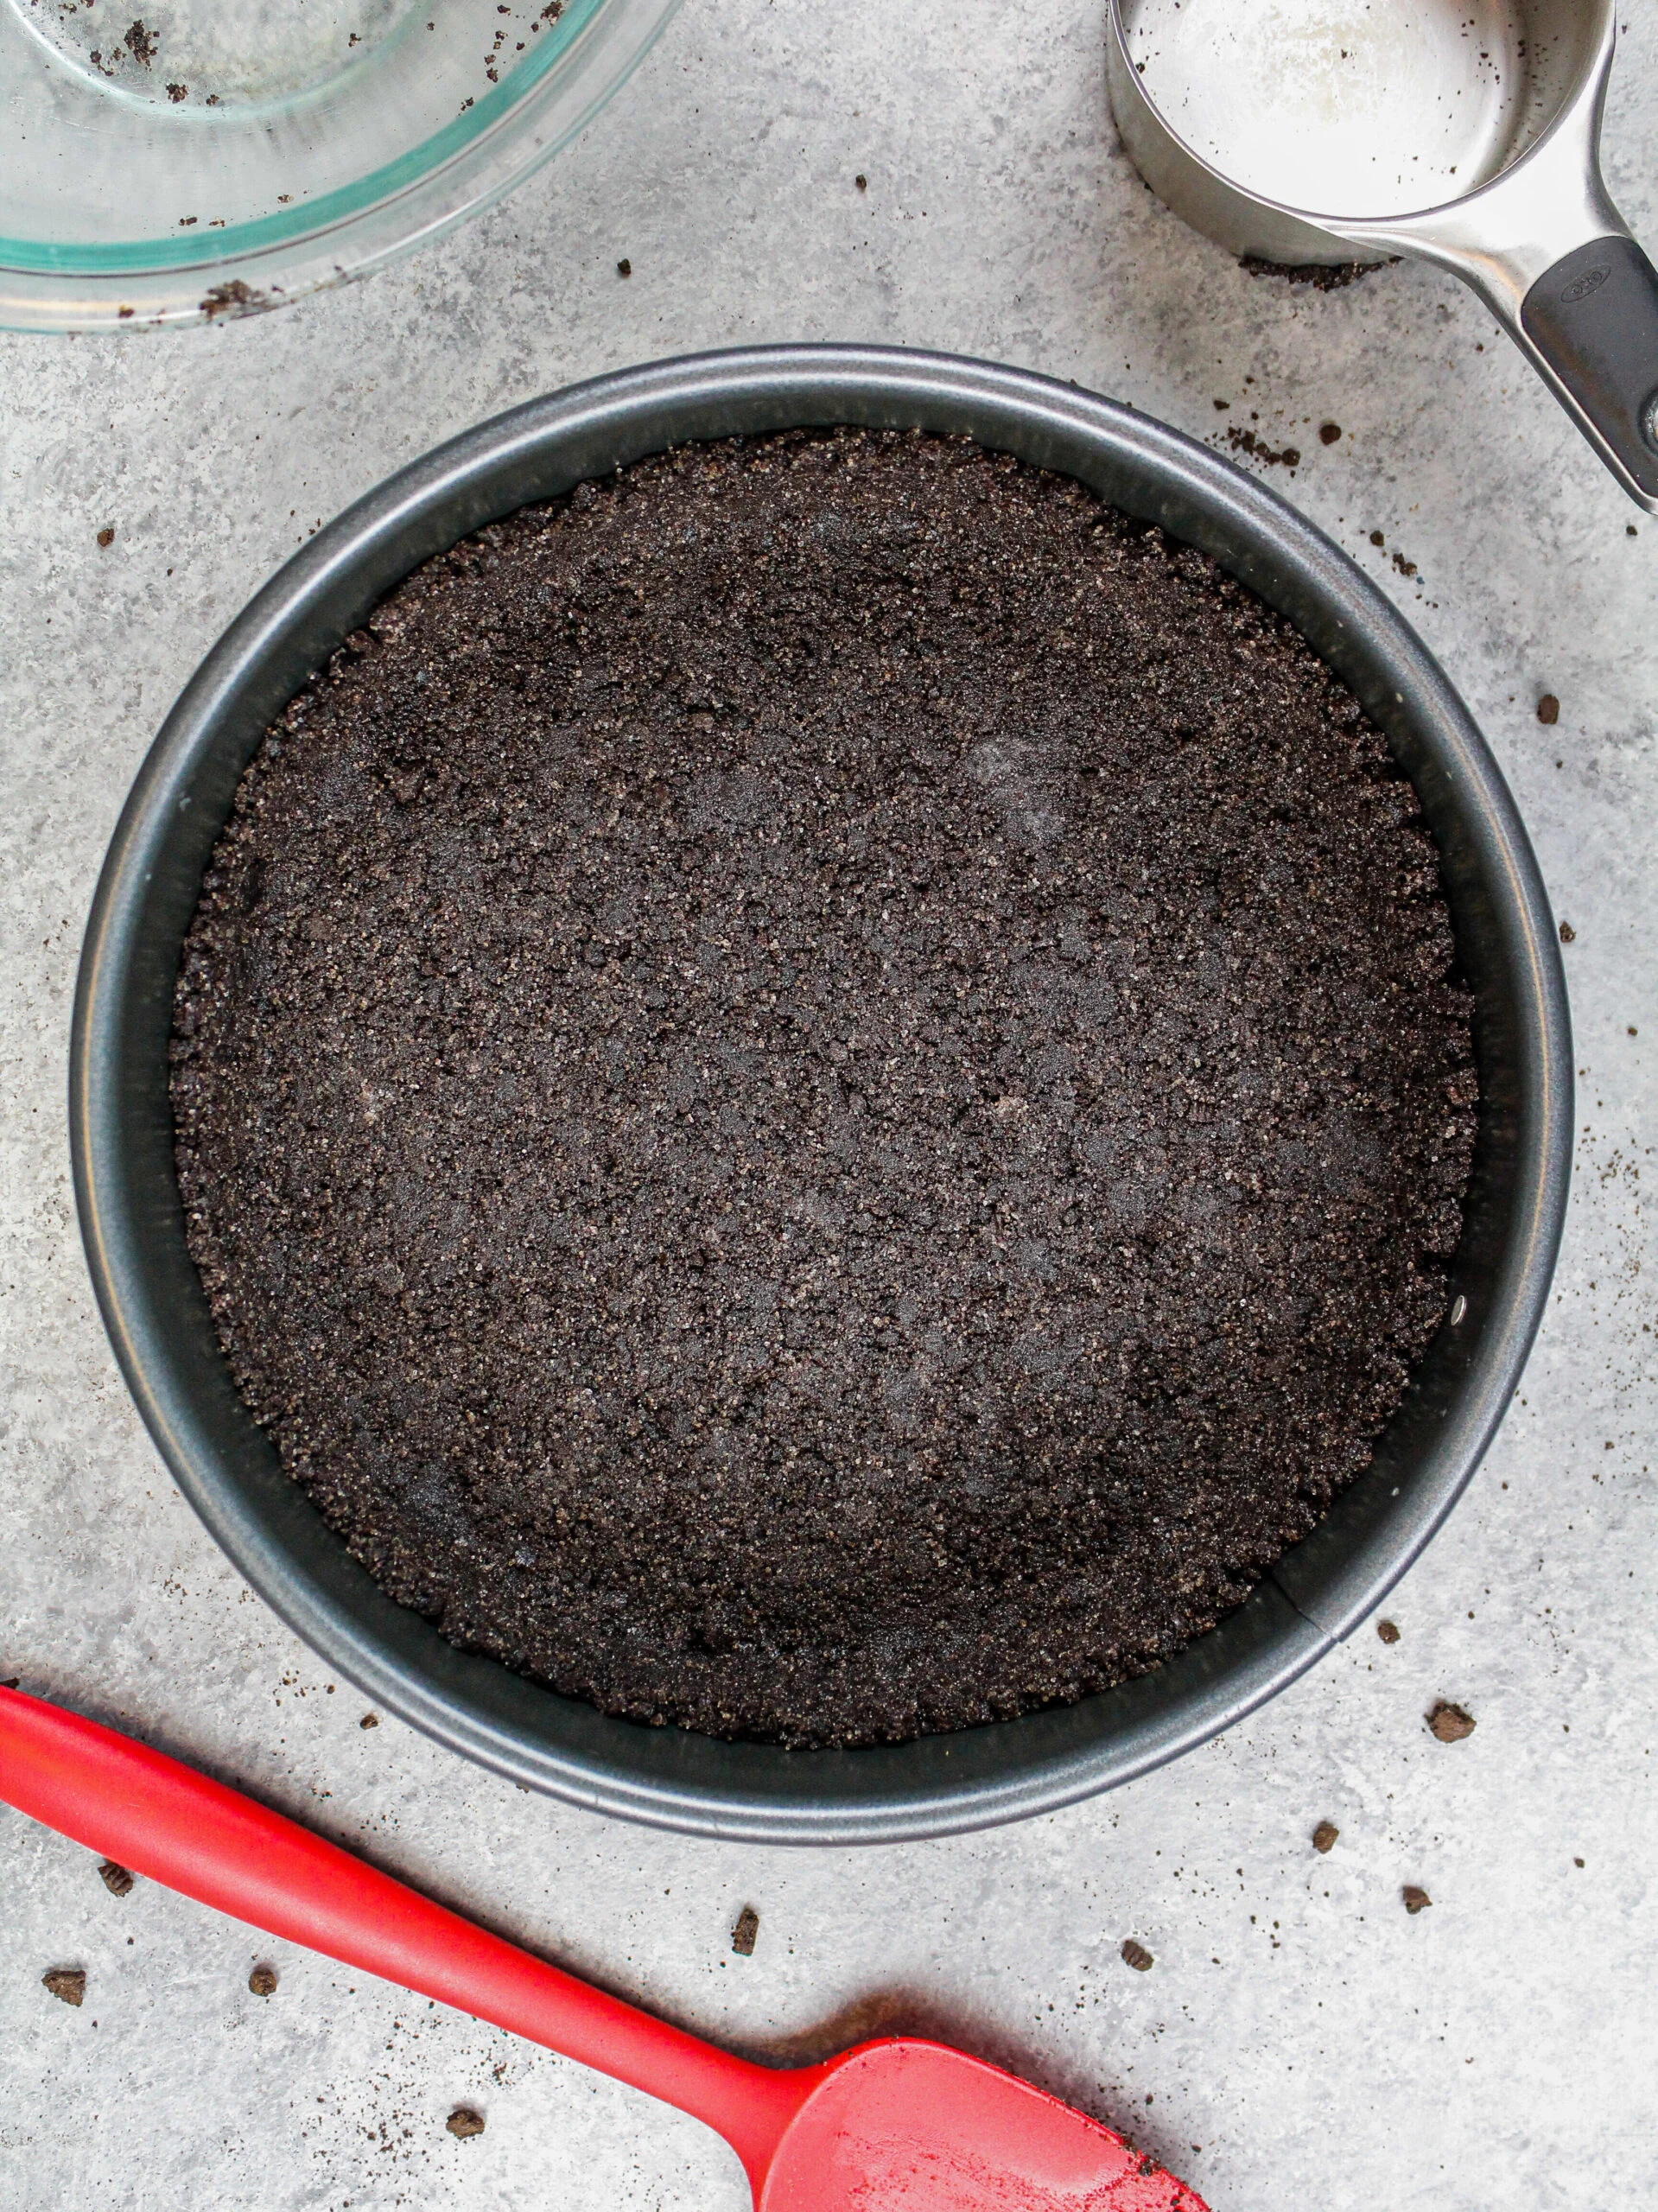 image of an oreo crumb crust about to be baked for a cheesecake